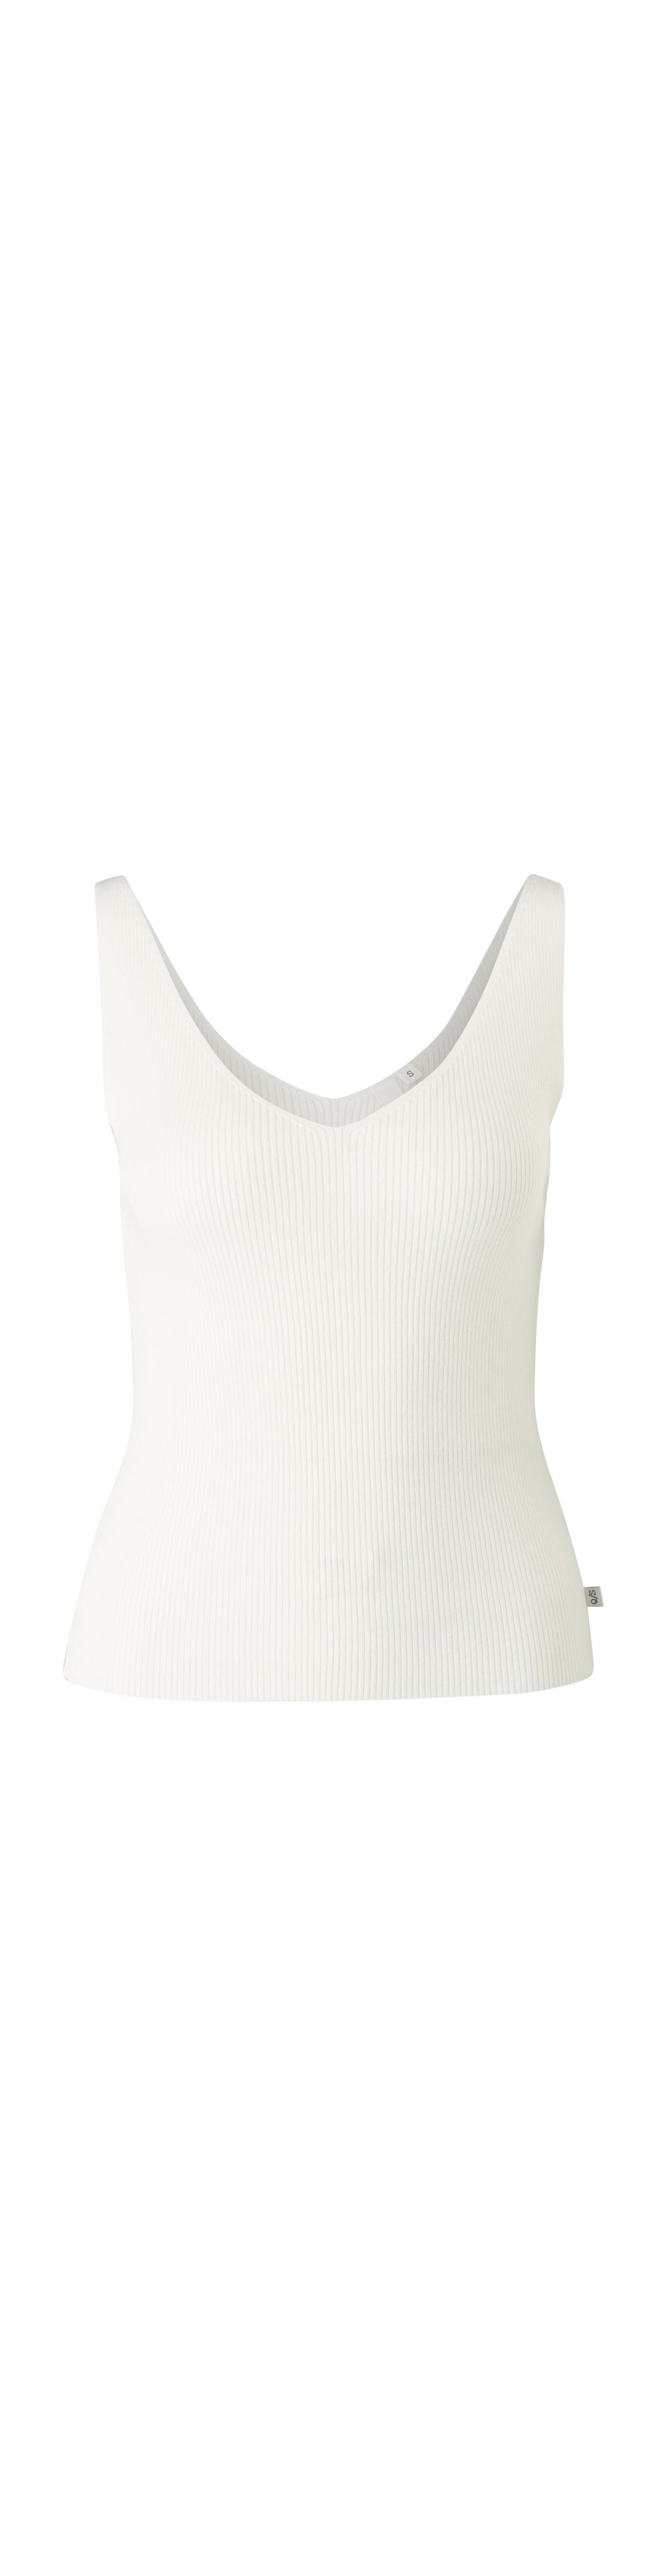 Cipria ribbed-knit vest Farfetch Mädchen Kleidung Tops & Shirts Tops 